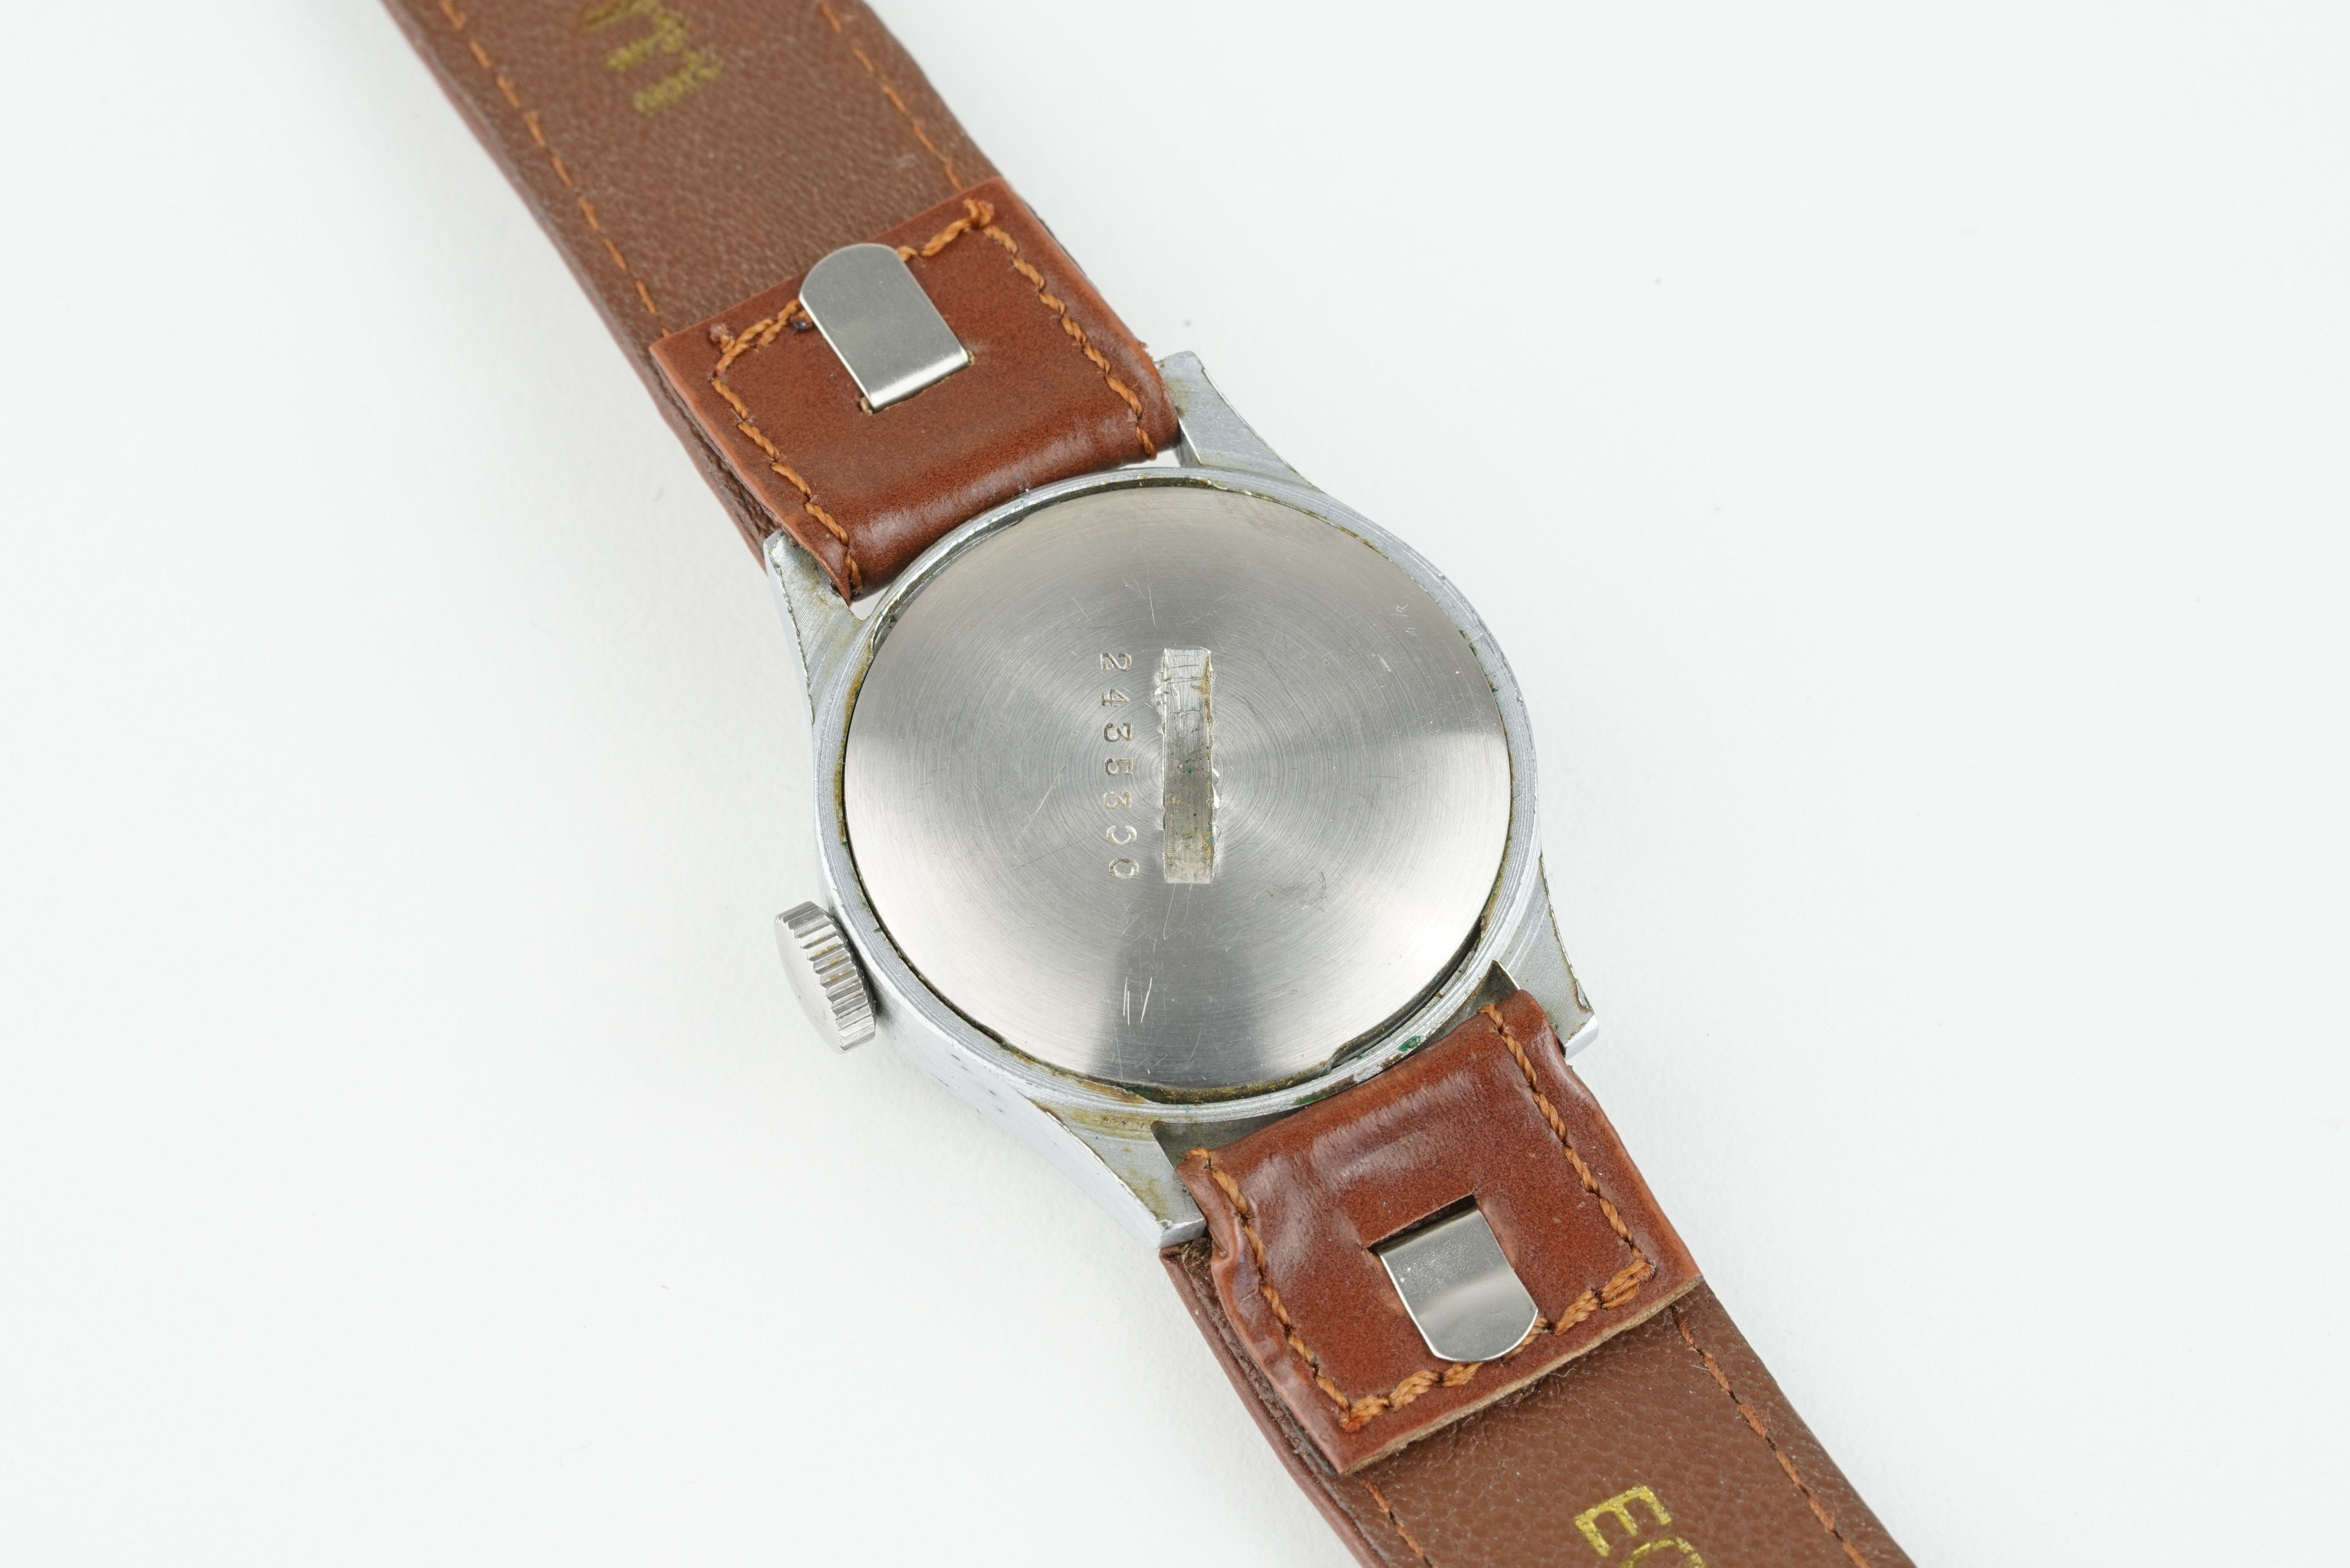 MOERIS VINTAGE WRISTWATCH, circular two tone dial with hour markers and hands, 29mm steel case - Image 2 of 2